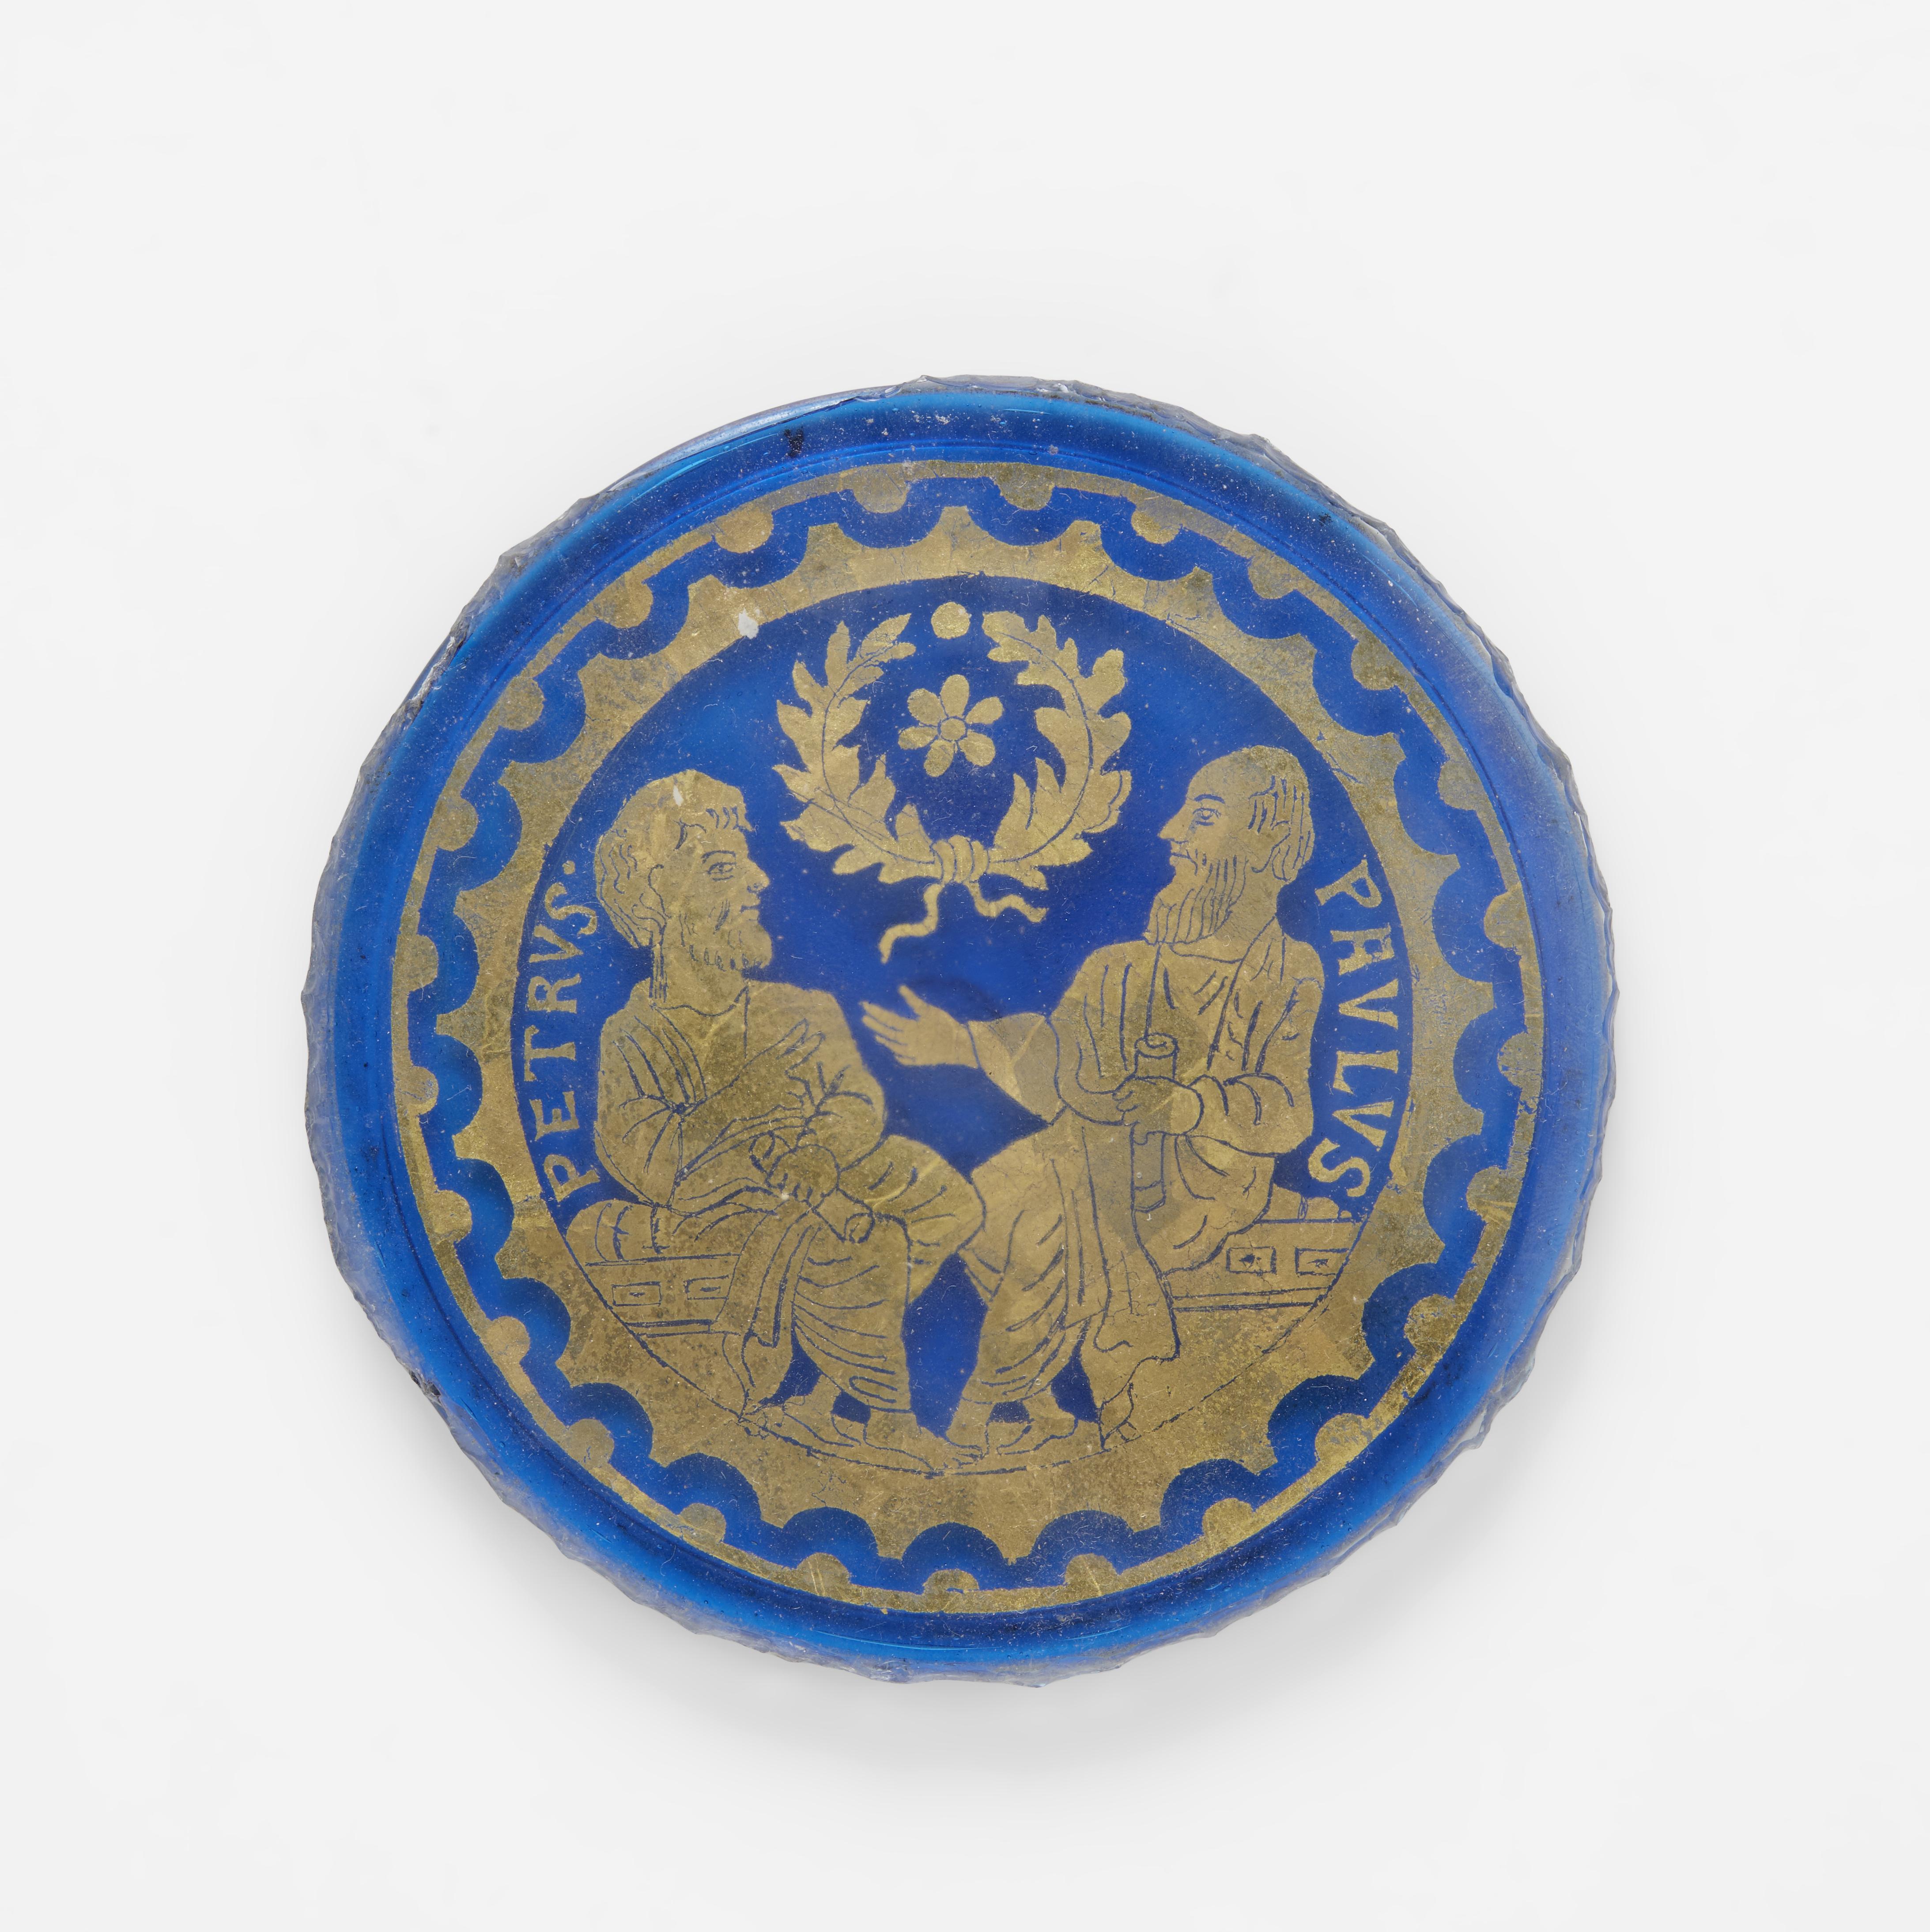 Venetian Blue Glass Romanesque Revival Medallion circa 1890 was produced by the Venice & Murano Glass & Mosiac Co. (1872-1919). The iridescent blue tinted glass is hand painted and decorated with gilt on the front surface. These decorative roundels